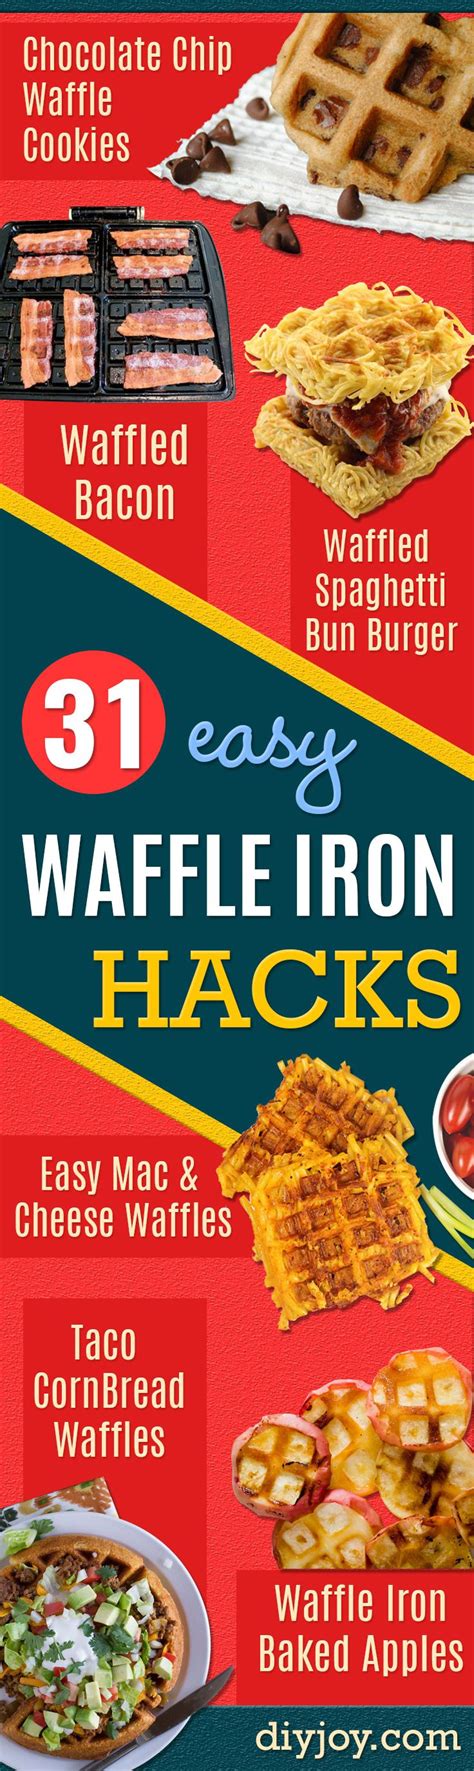 You can fry them immediately. 31 Waffle Iron Hacks You Have to See To Believe | Waffle ...